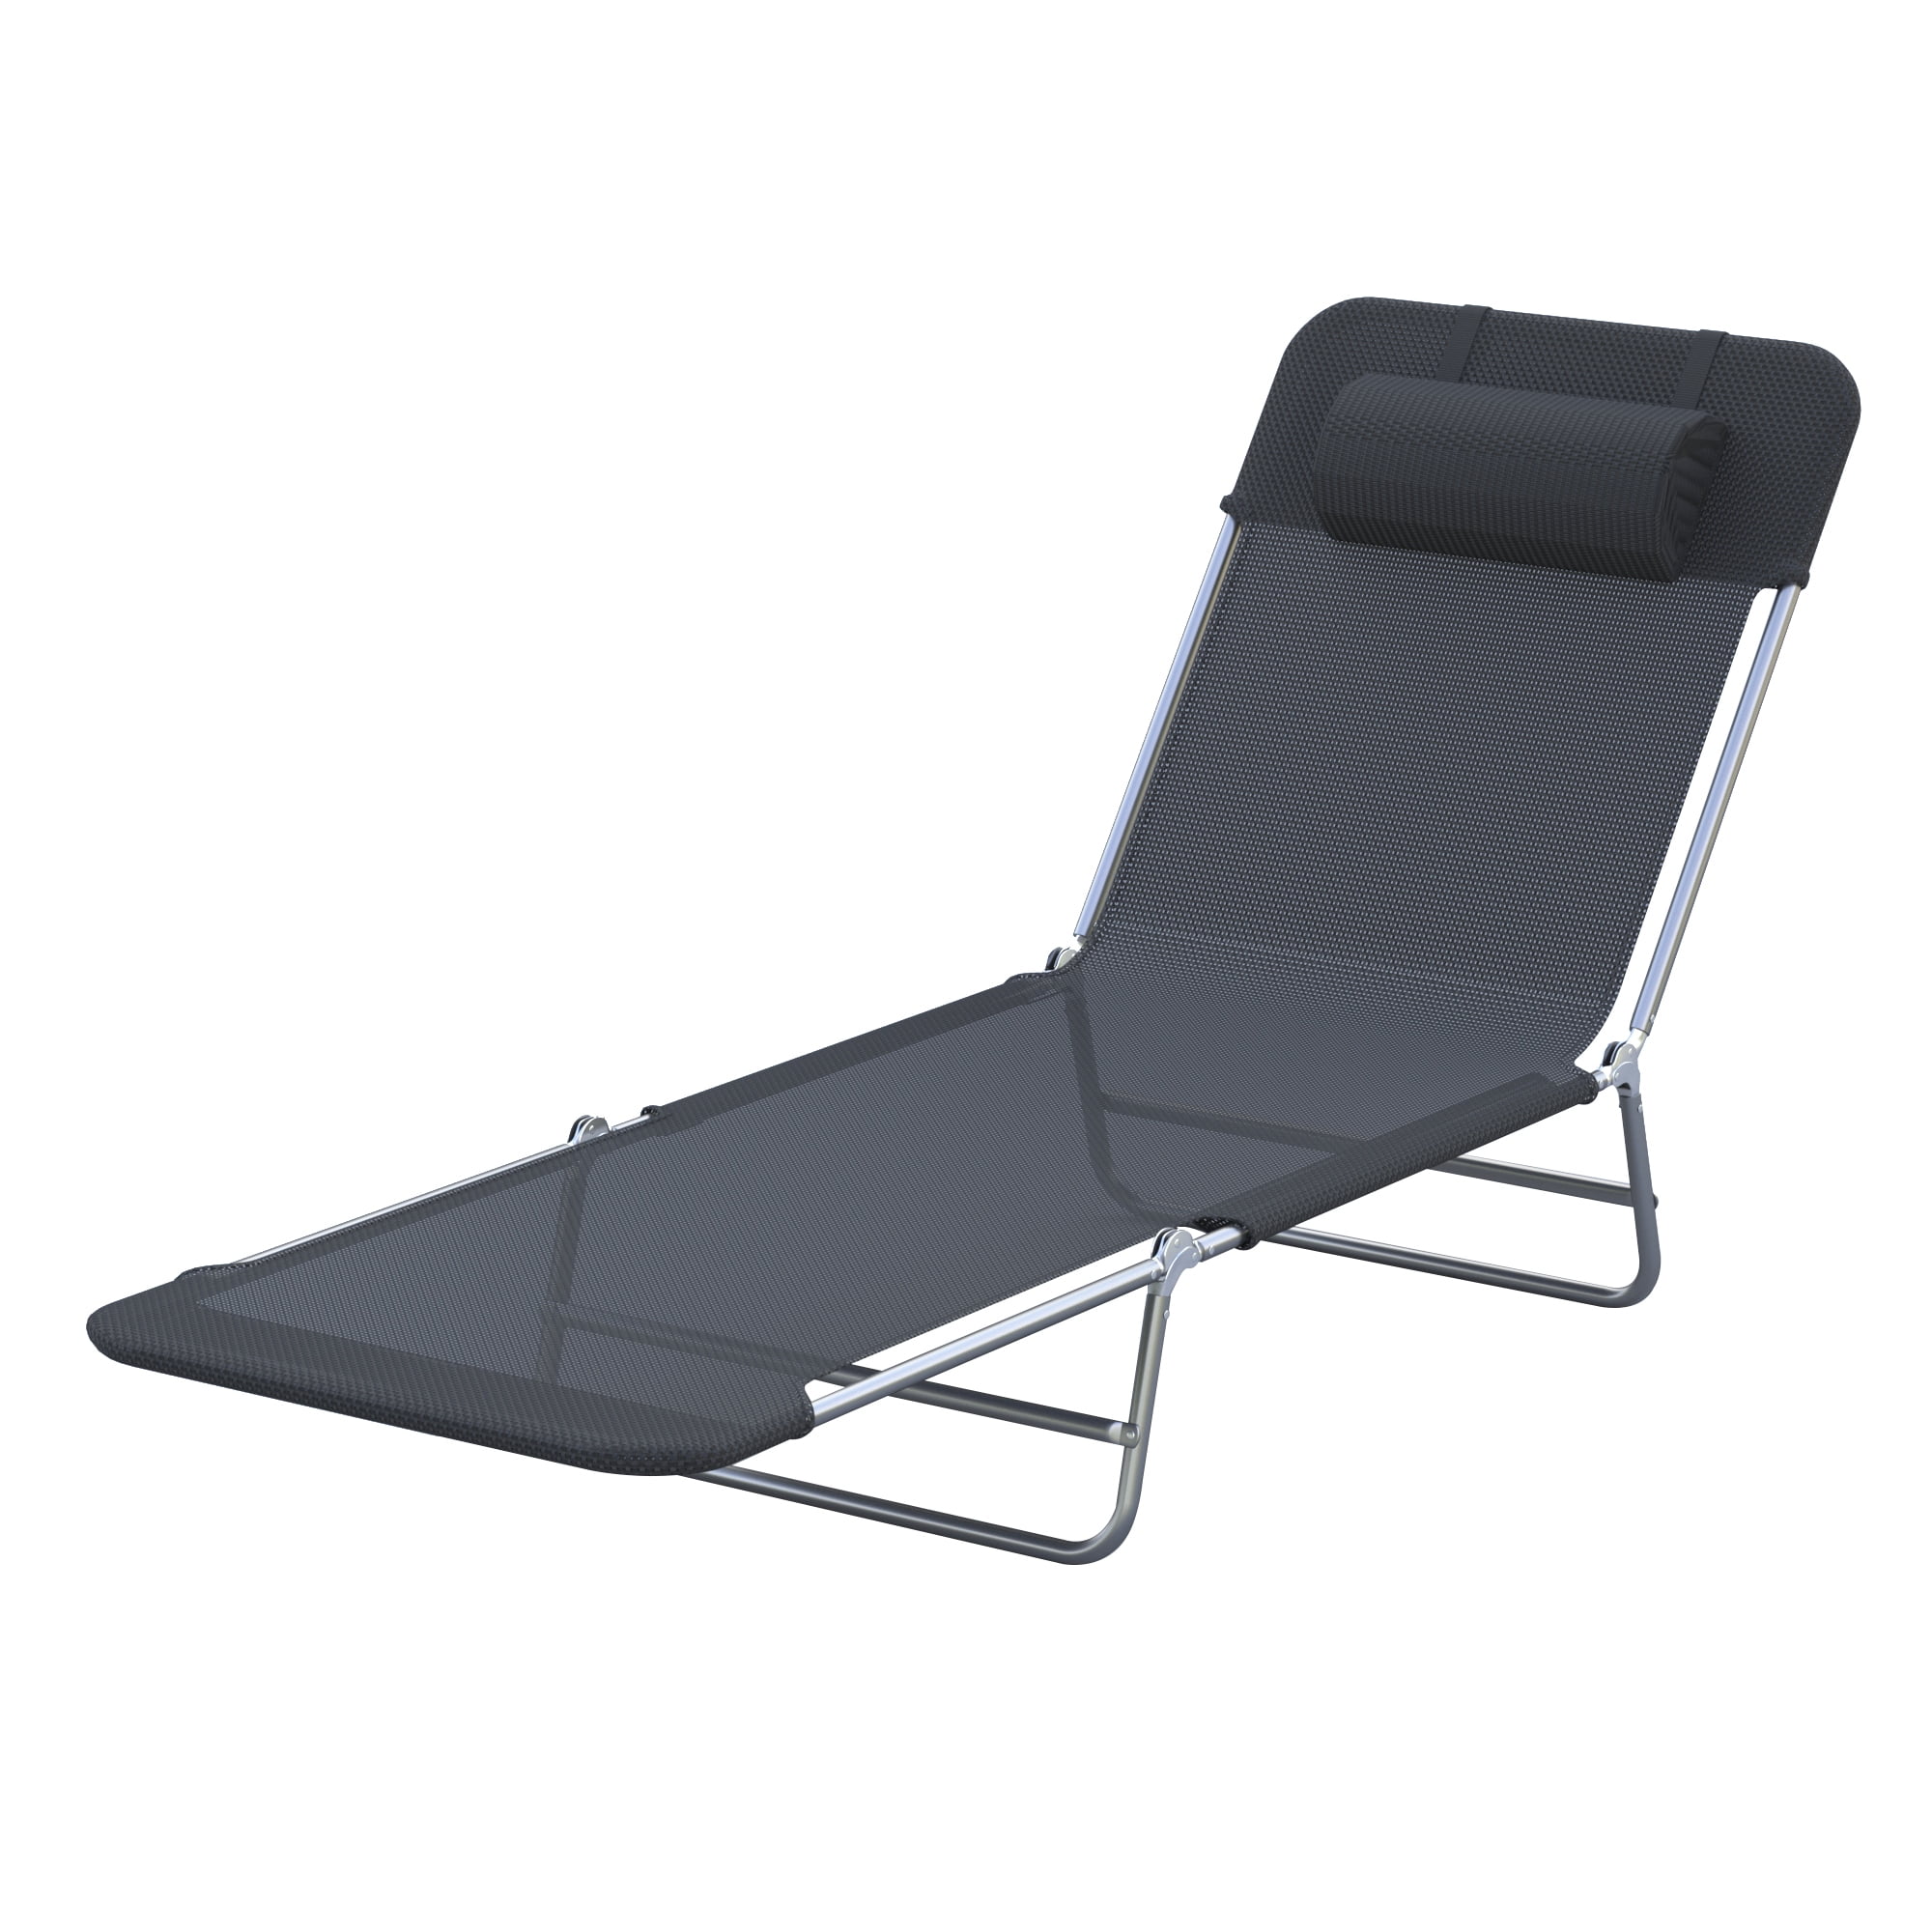 Details about  / Outdoor Folding Reclining Beach Sun Patio Chaise Lounge Chair Pool Lawn Lounger